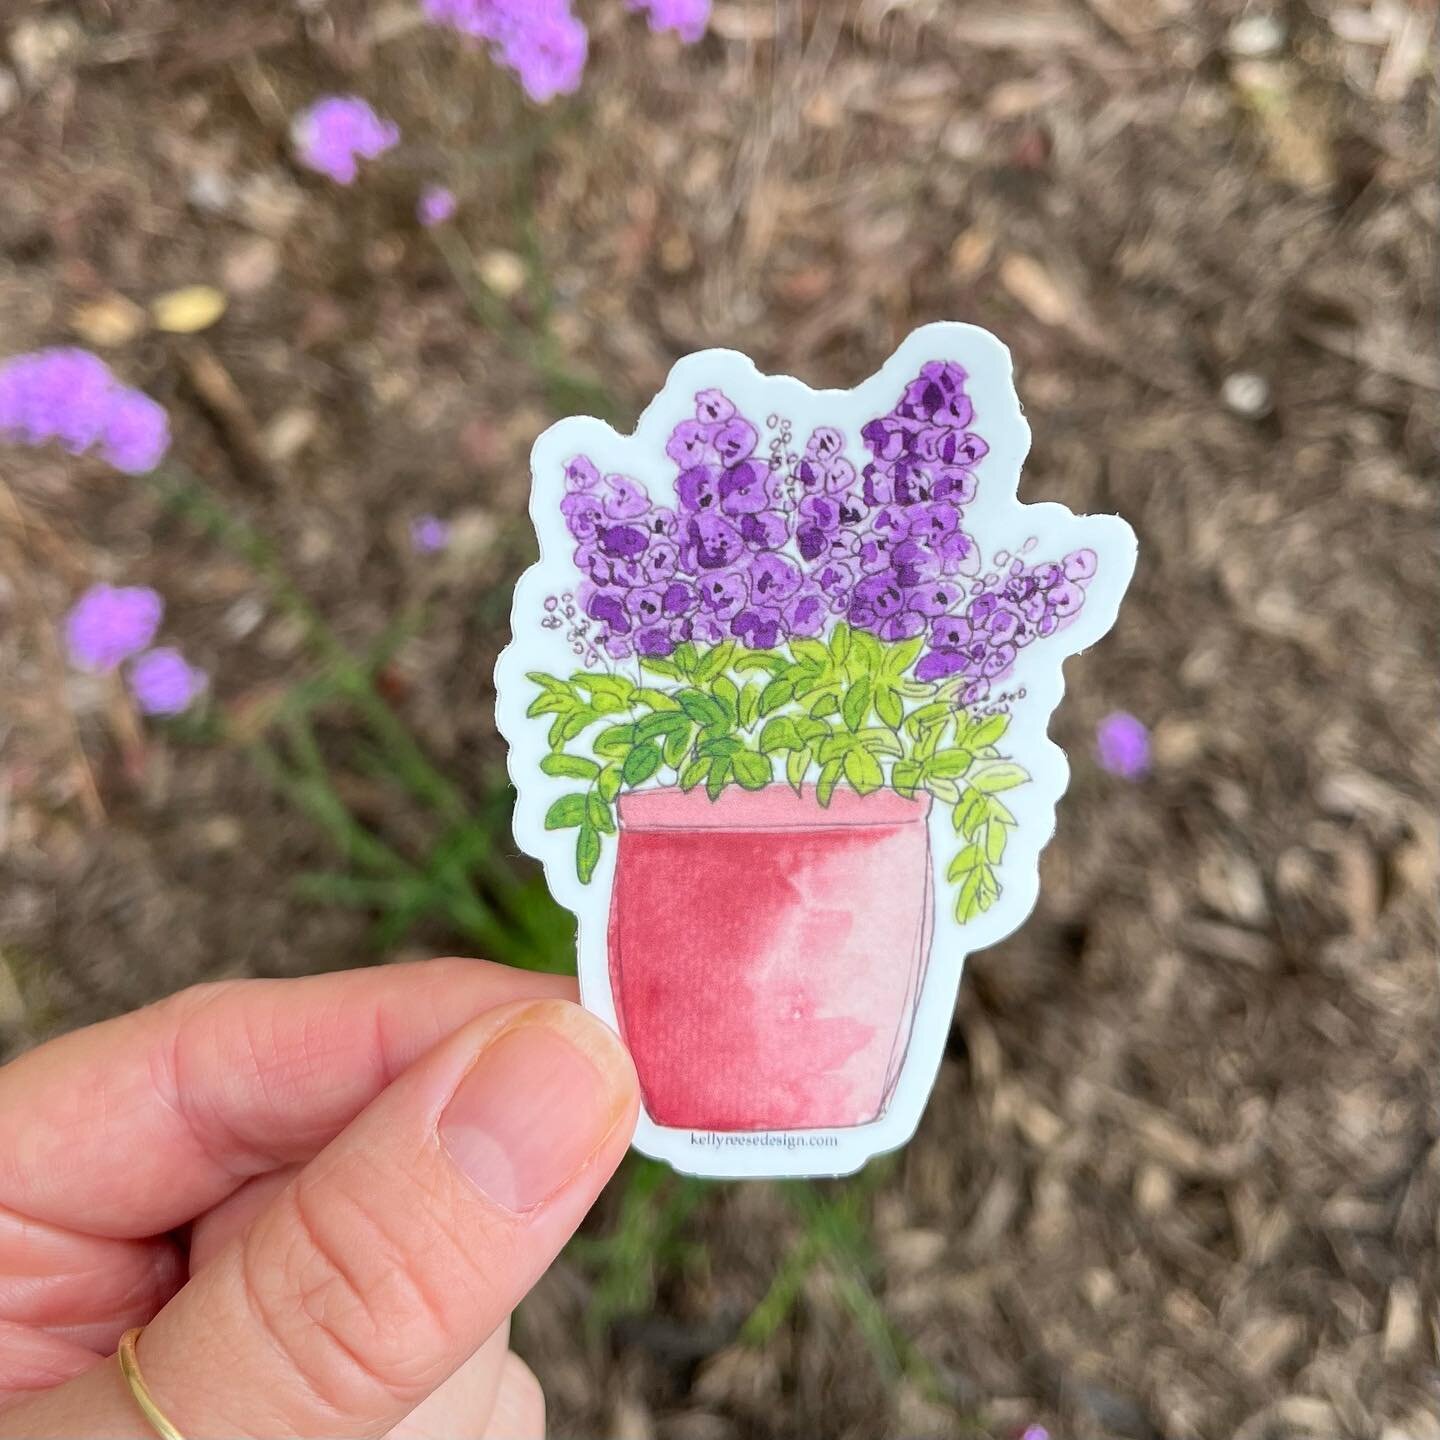 Painting potted flowers is my new favorite pastime 💜✨ New stickers for sale in my Etsy shop!